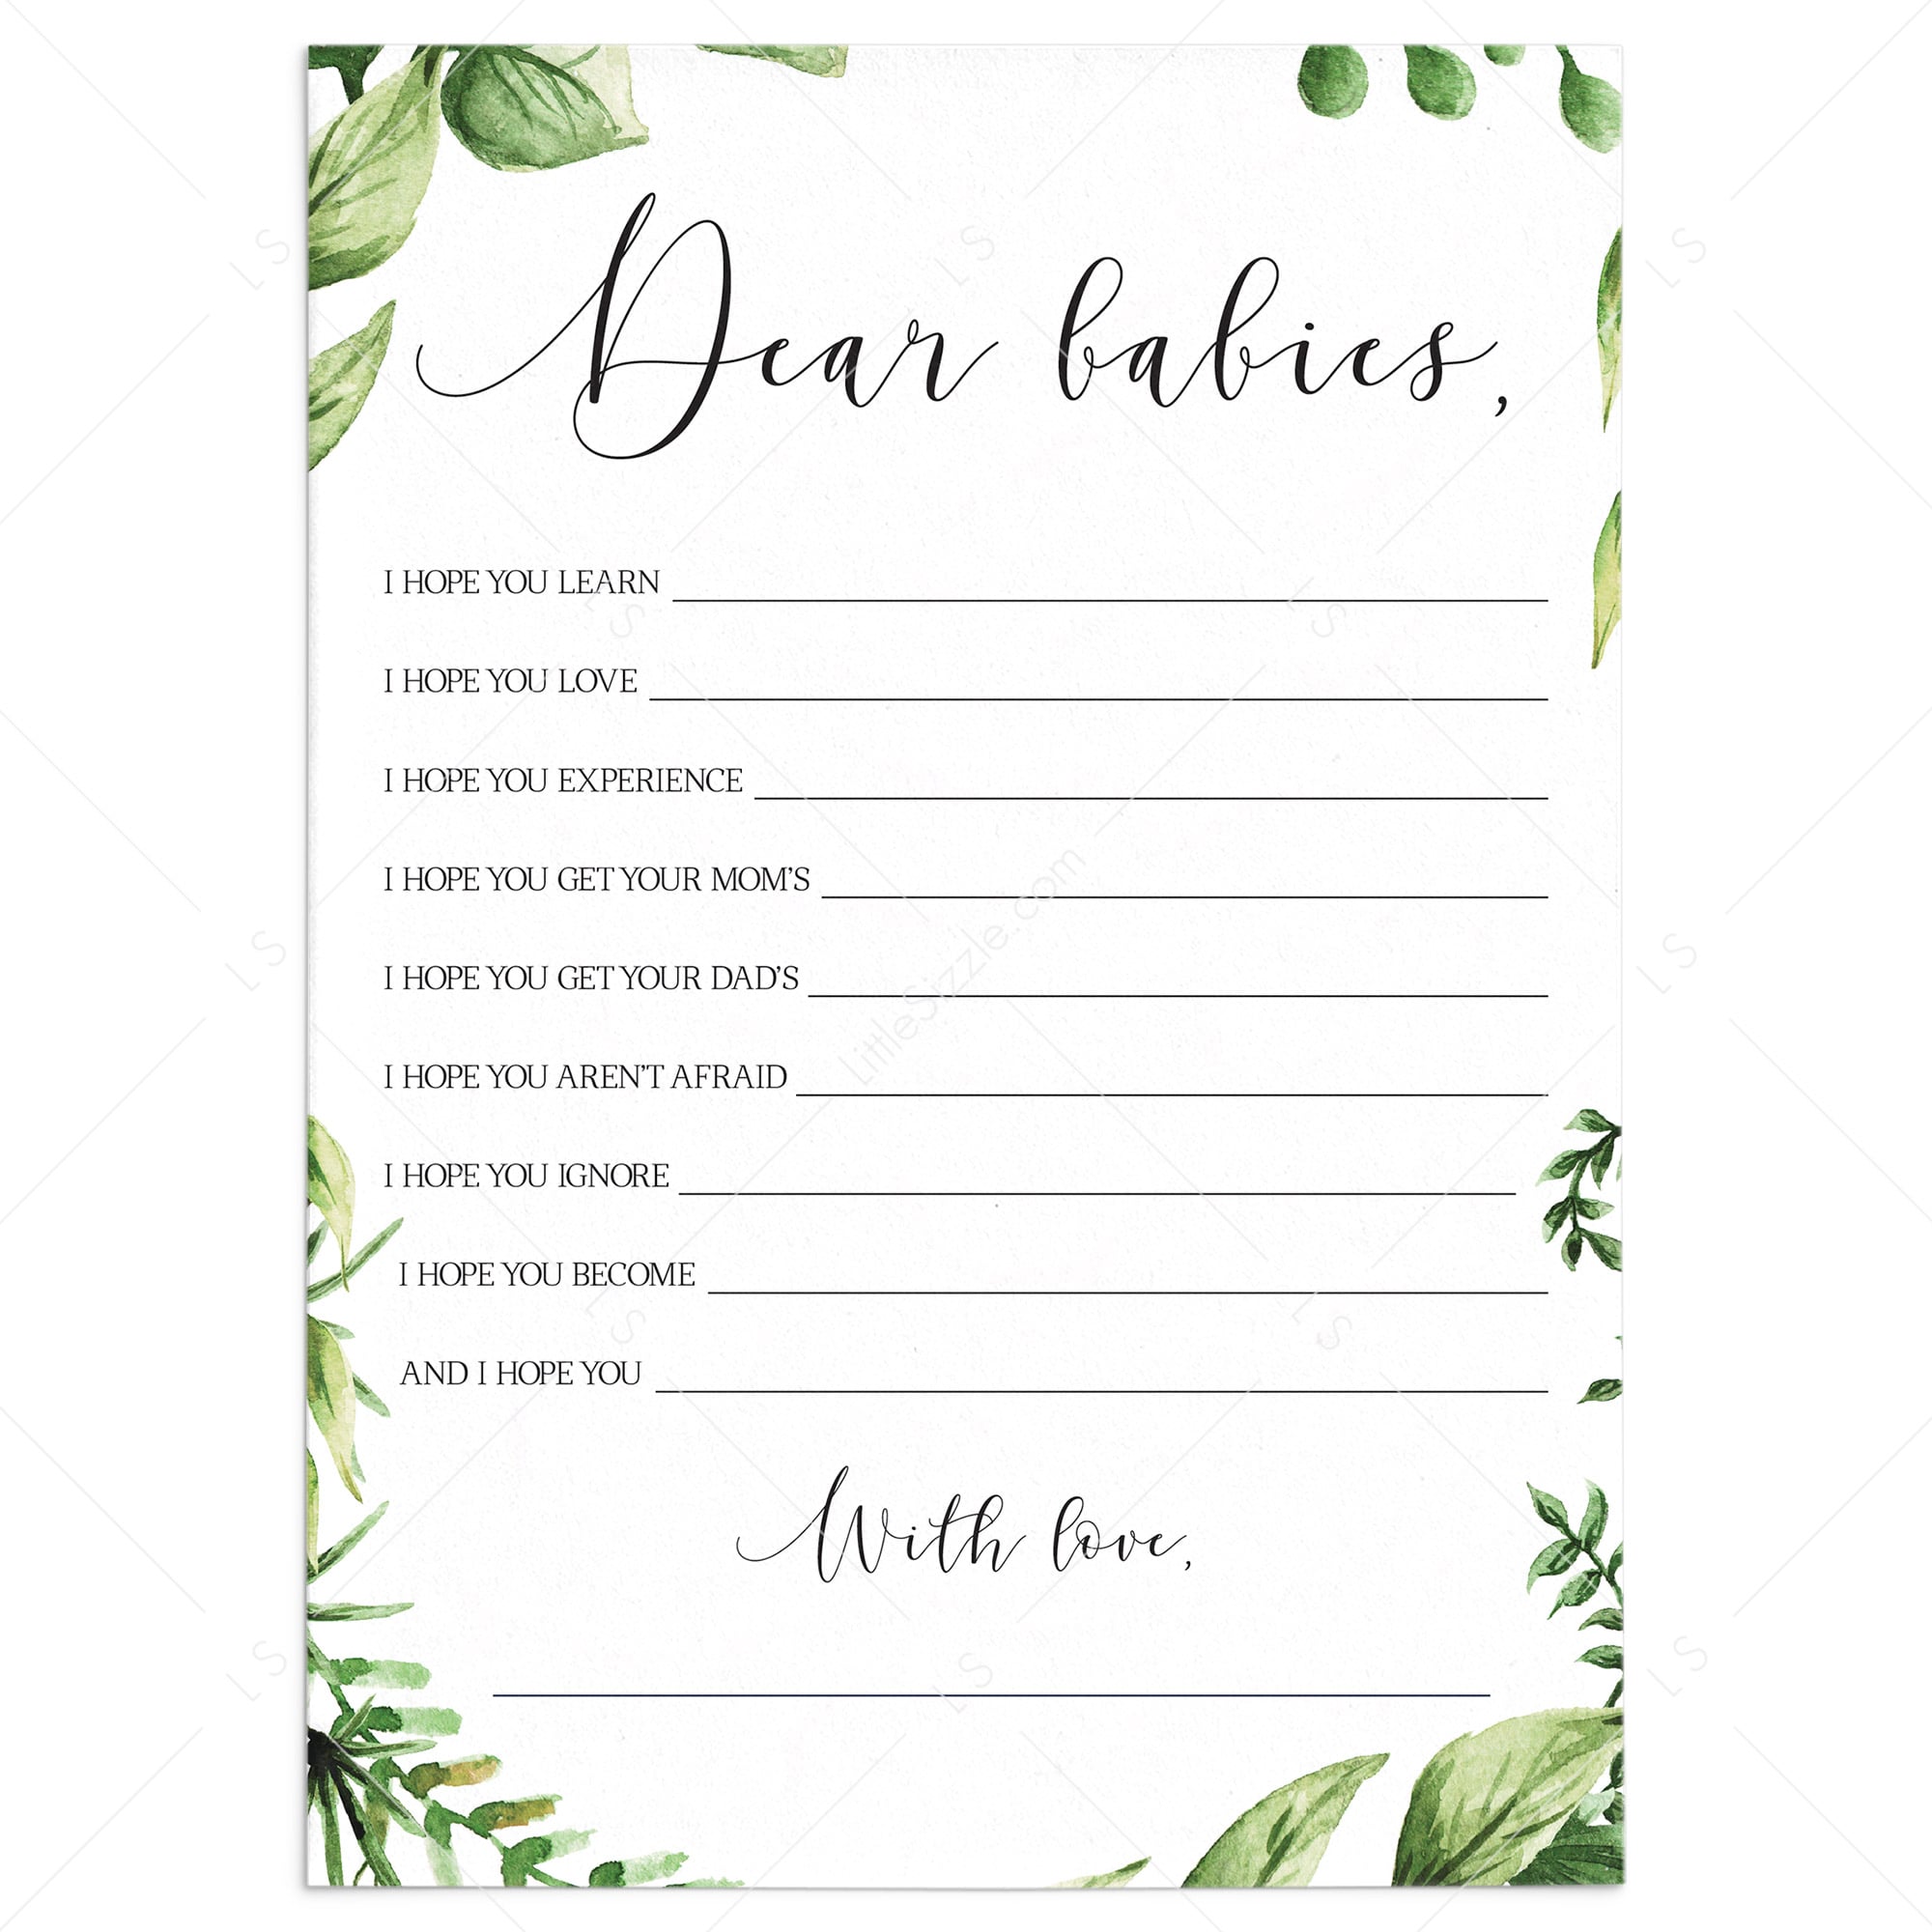 Twin baby shower dear baby card printable by LittleSizzle